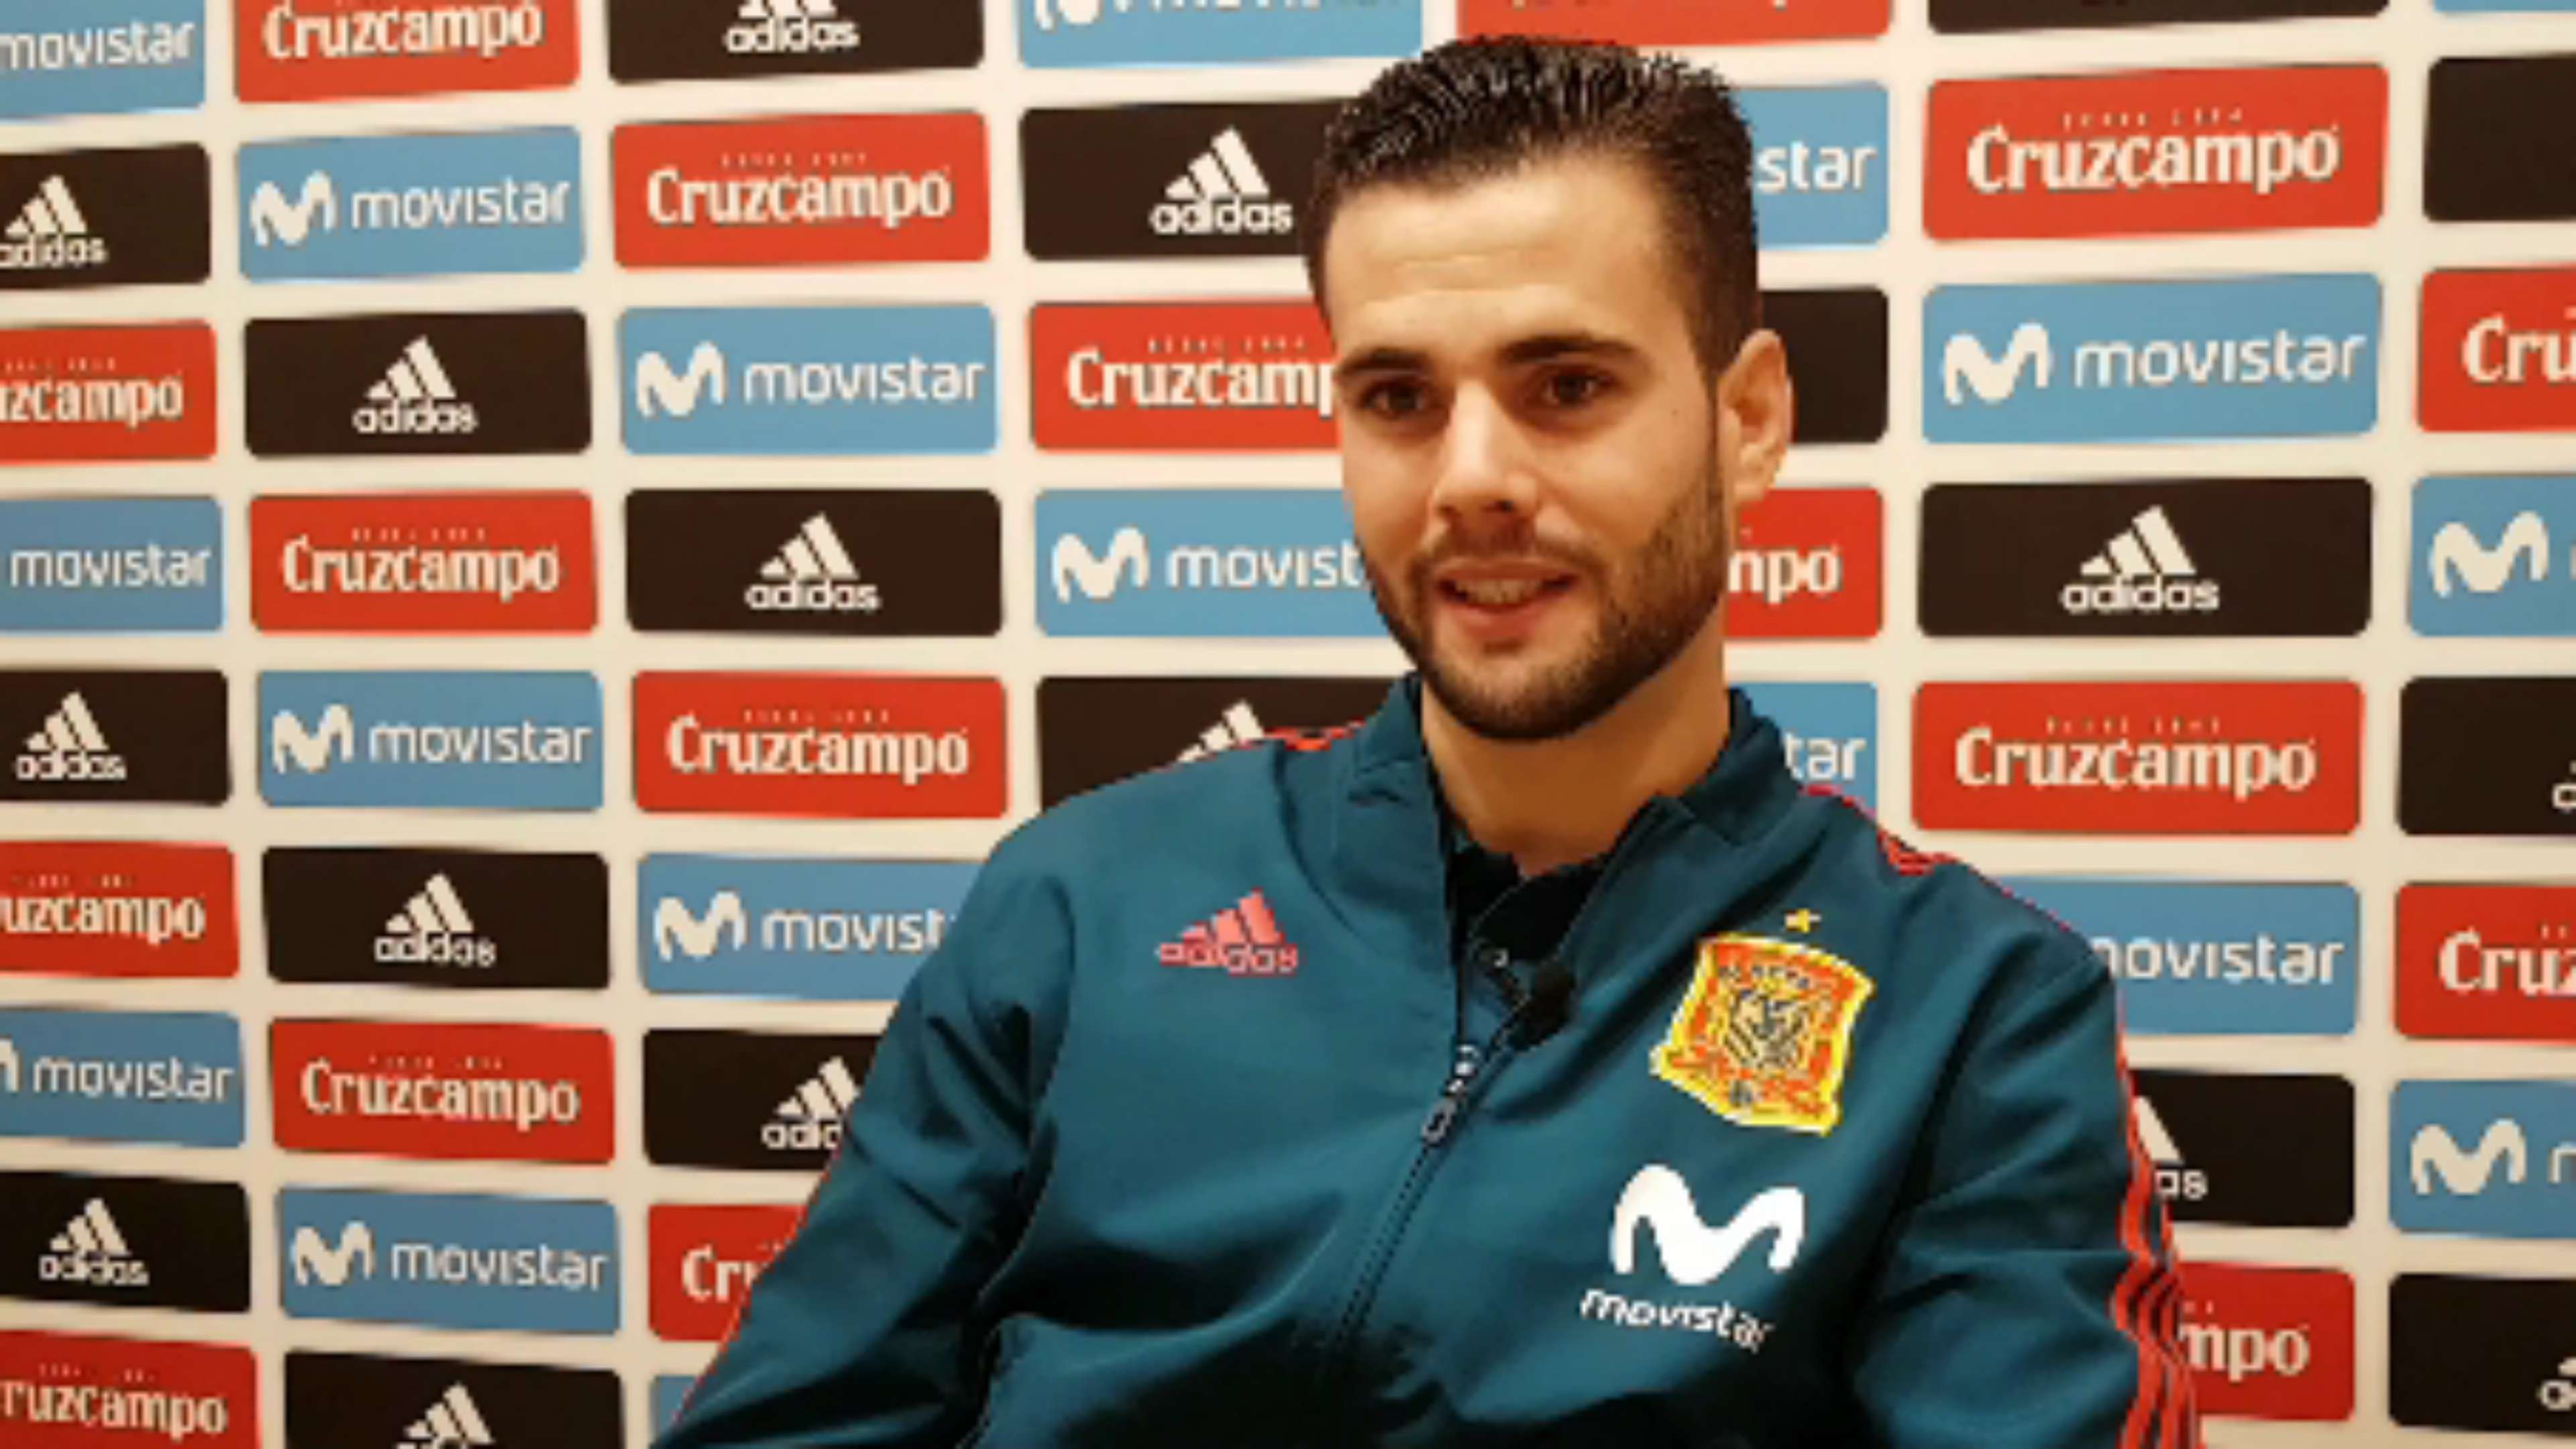 Nacho Fernández, Real Madrid and Spain player during the interview with Goal